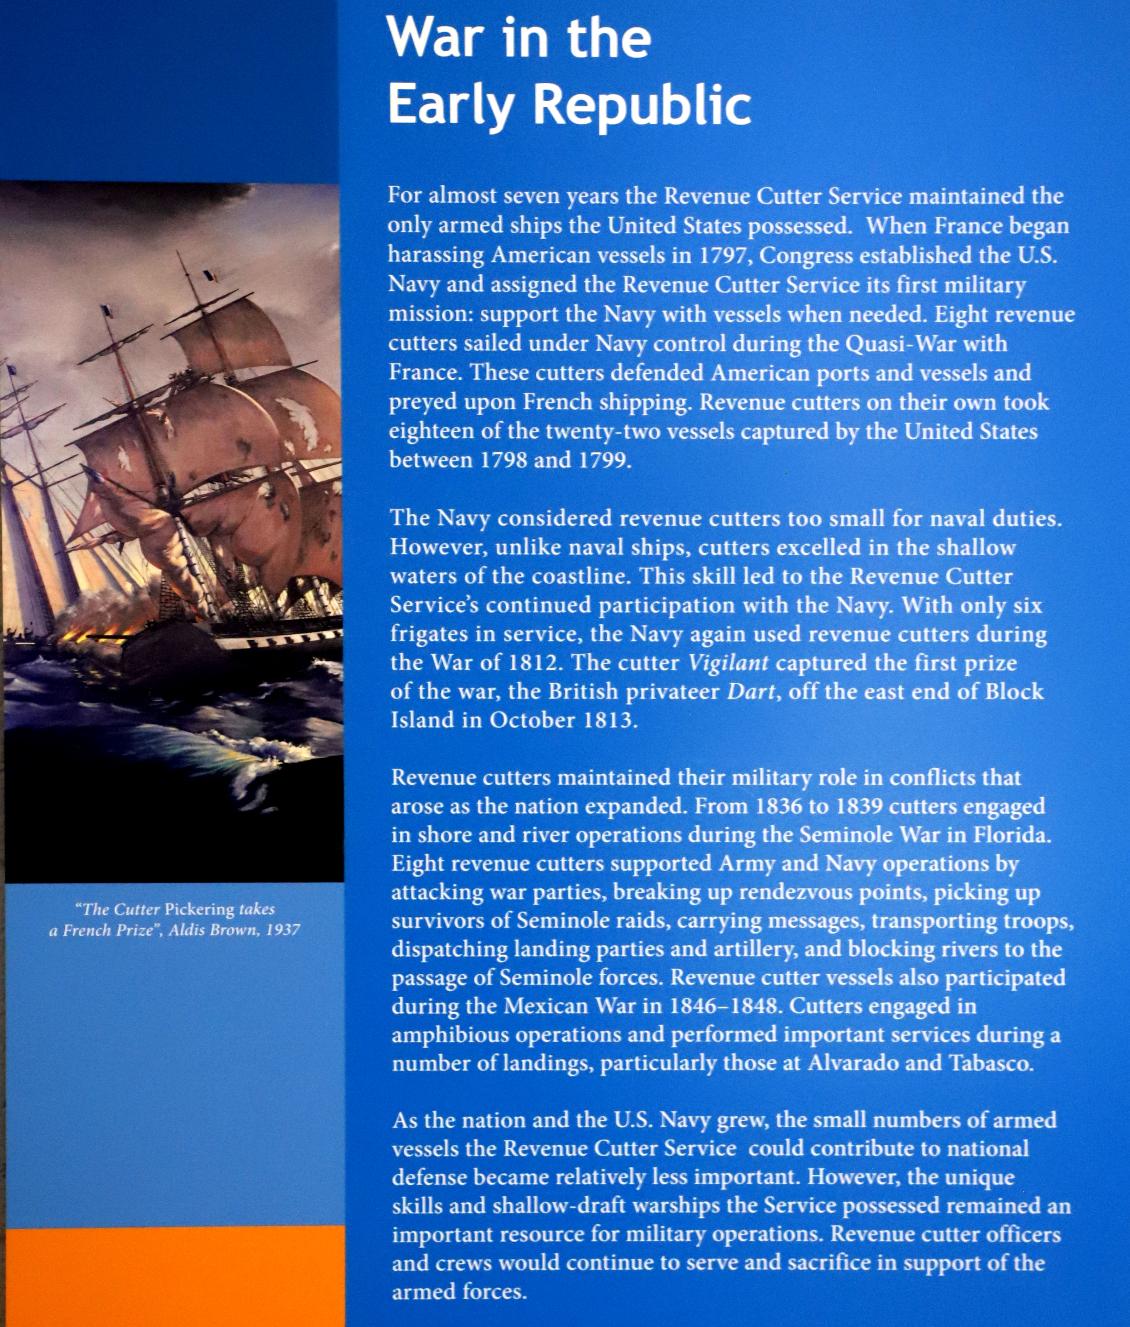 US Coast Guard Academy Museum - War in the Early Republic